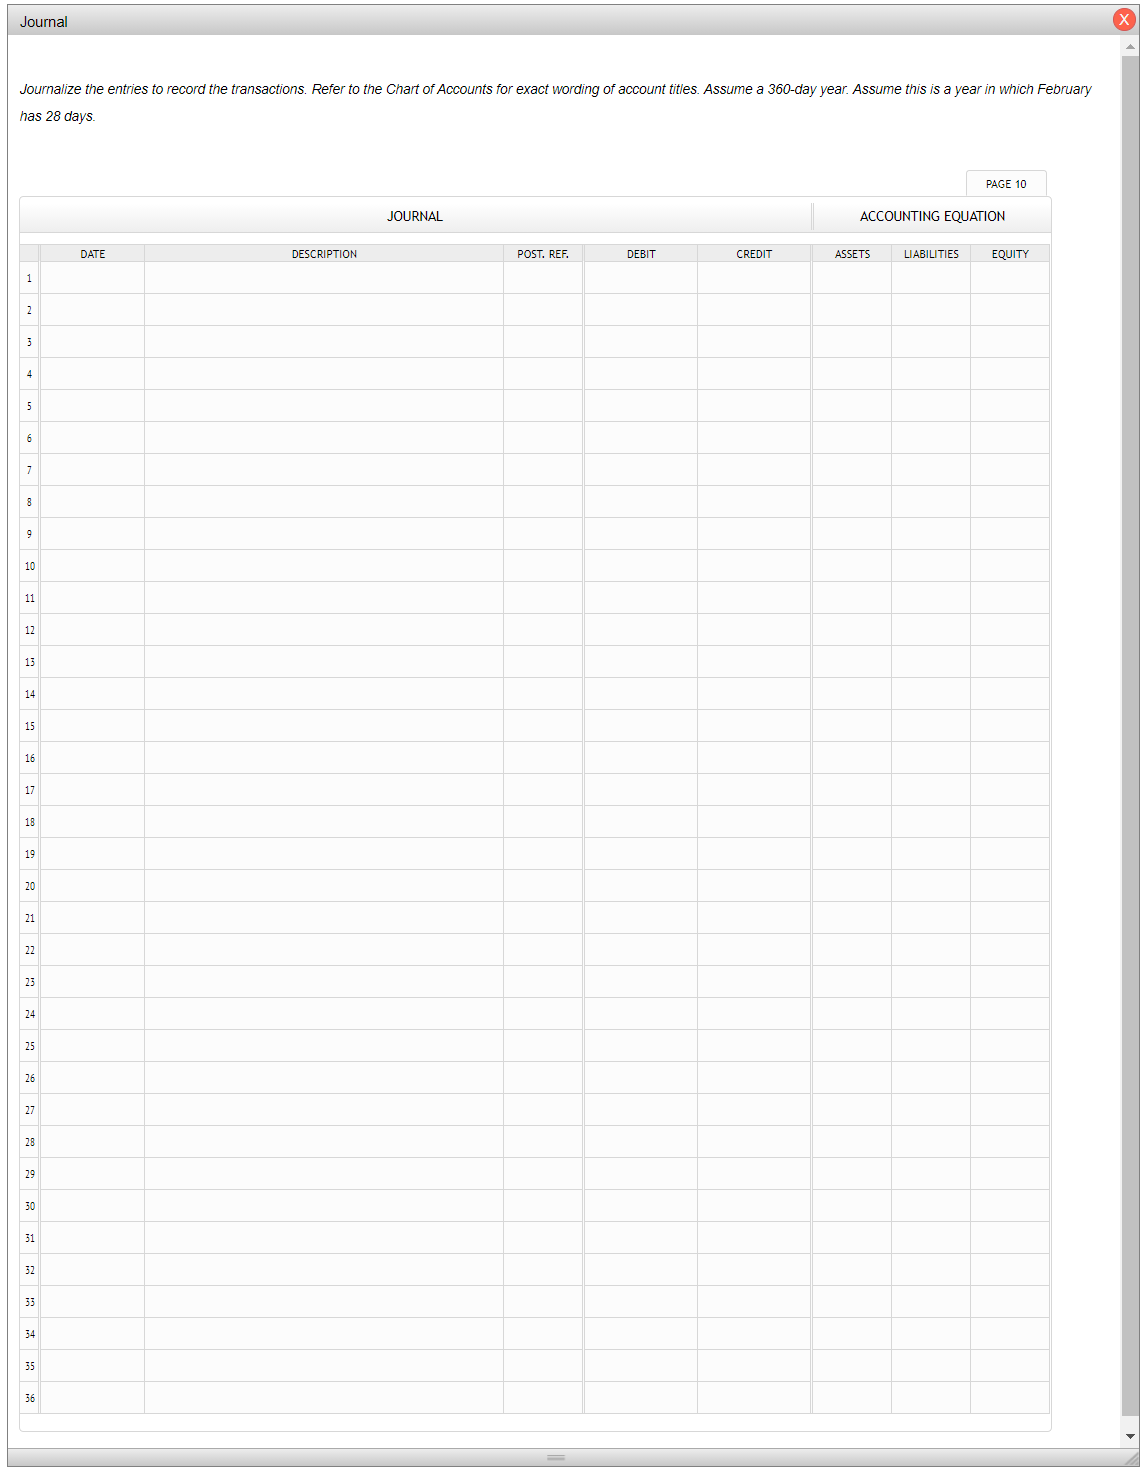 Journal
X
Journalize the entries to record the transactions. Refer to the Chart of Accounts for exact wording of account titles. Assume a 360-day year. Assume this is a year in which February
has 28 days.
PAGE 10
JOURNAL
ACCOUNTING EQUATION
DATE
DESCRIPTION
POST. REF.
DEBIT
CREDIT
ASSETS
LIABILITIES
EQUITY
1
2
4
5
10
11
12
13
14
15
16
17
18
19
20
21
22
23
24
25
26
27
28
29
30
31
32
33
34
35
36
